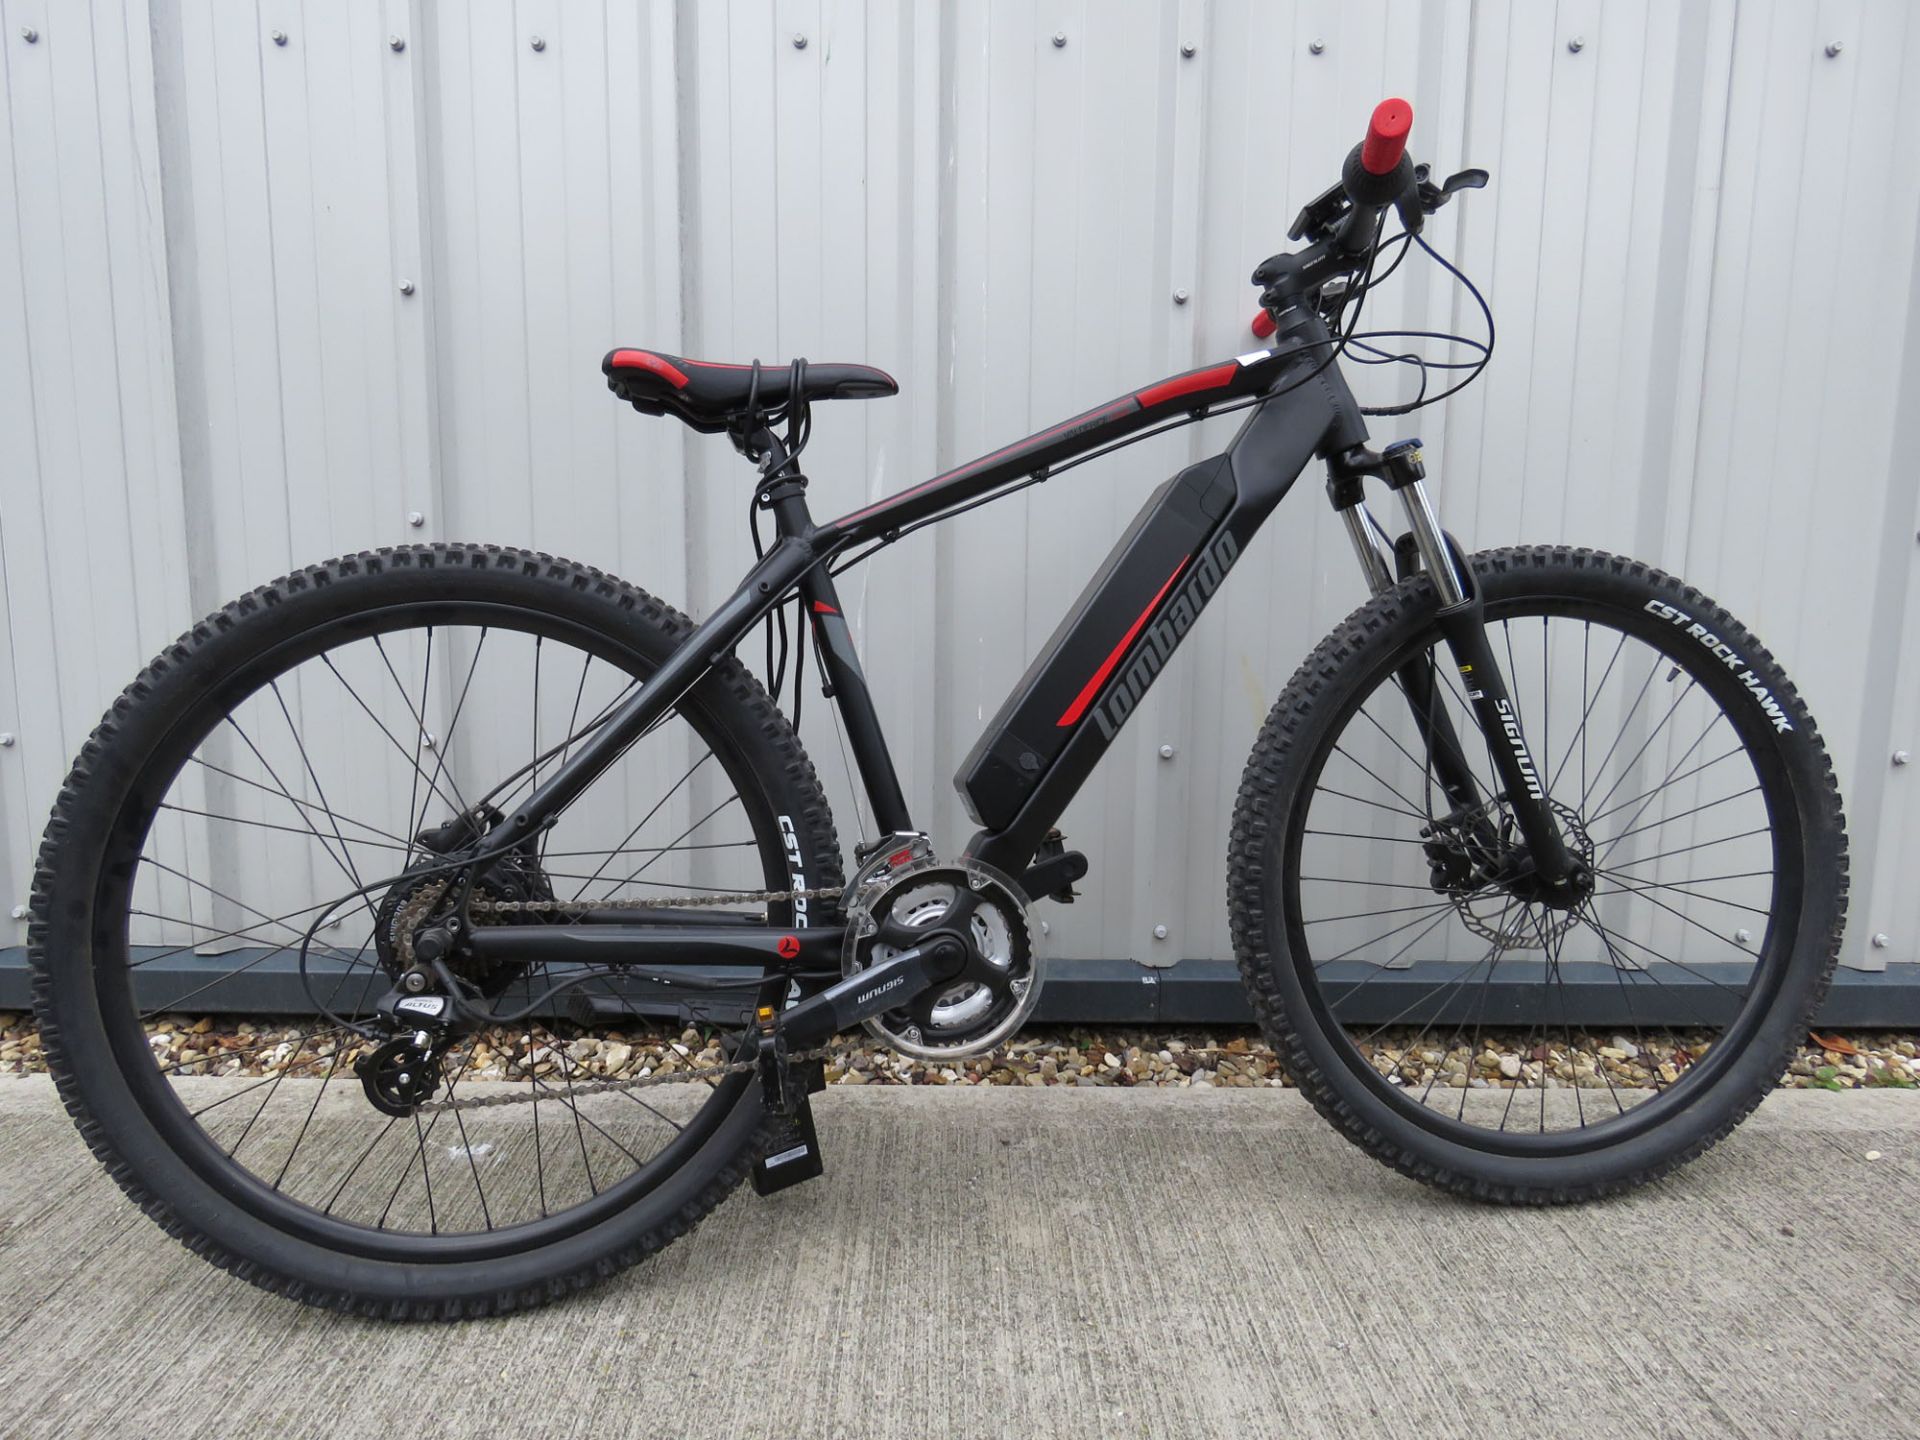 CST Rock Hawk electric mountain bike in black and red with charger